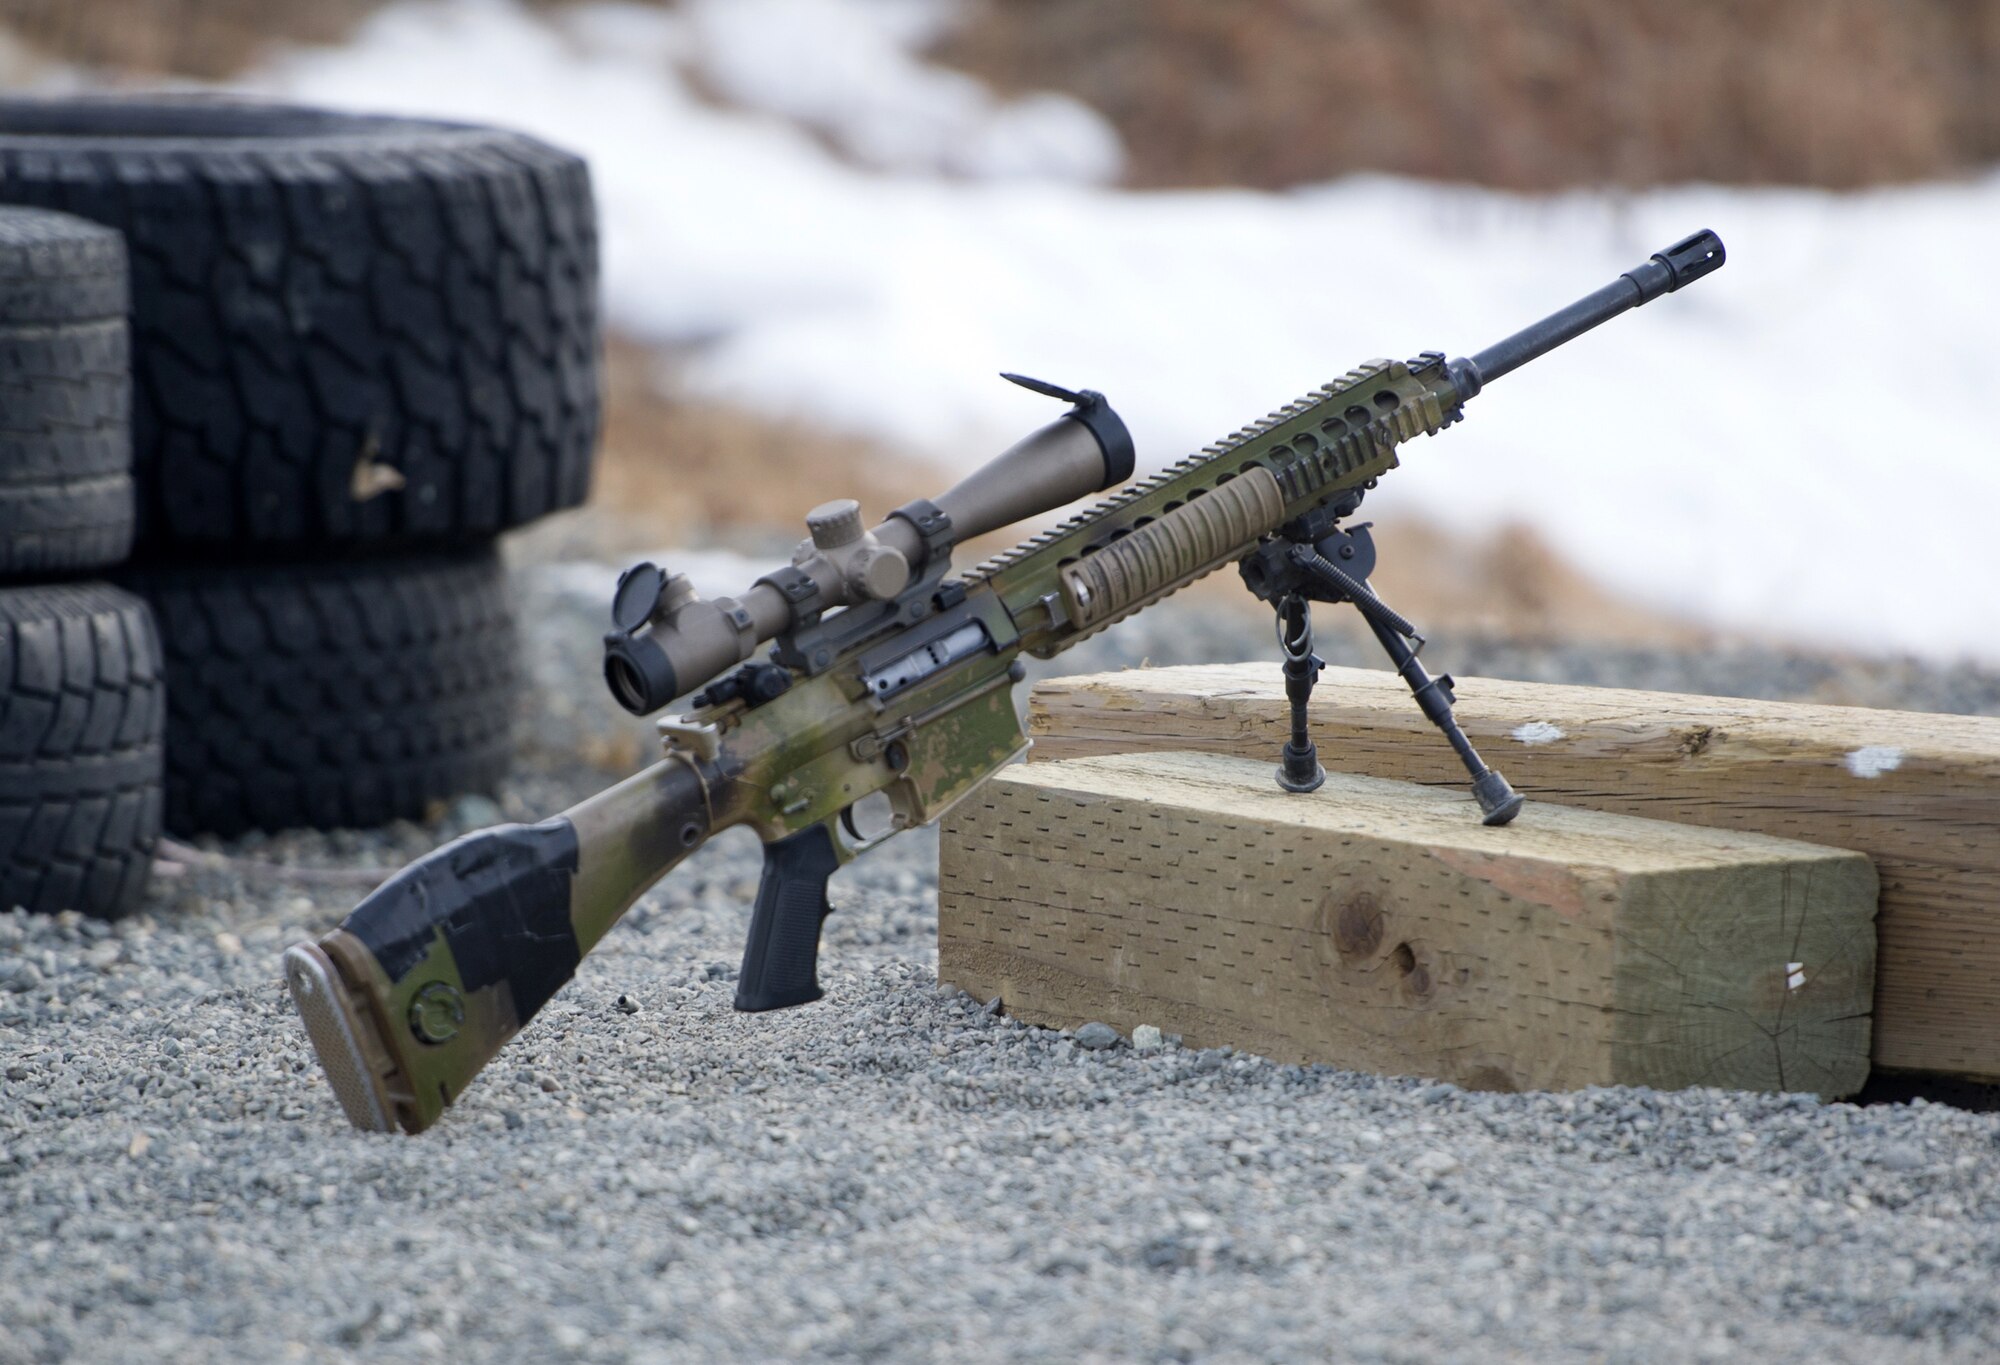 A M110 Semi-Automatic Sniper System sits on the firing line on Statler range at Joint Base Elmendorf-Richardson, Alaska, before paratroopers assigned to the 1st Squadron, 40th Cavalry Regiment (Airborne), 4th Infantry Brigade Combat Team (Airborne), 25th Infantry Division, U.S. Army Alaska, hone marksmanship skills, April 6, 2018.  A sniper's main responsibility is to deliver discriminatory, highly accurate rifle fire against enemy targets that cannot be engaged successfully by the regular rifleman due to range, size, location, fleeting nature, or visibility.